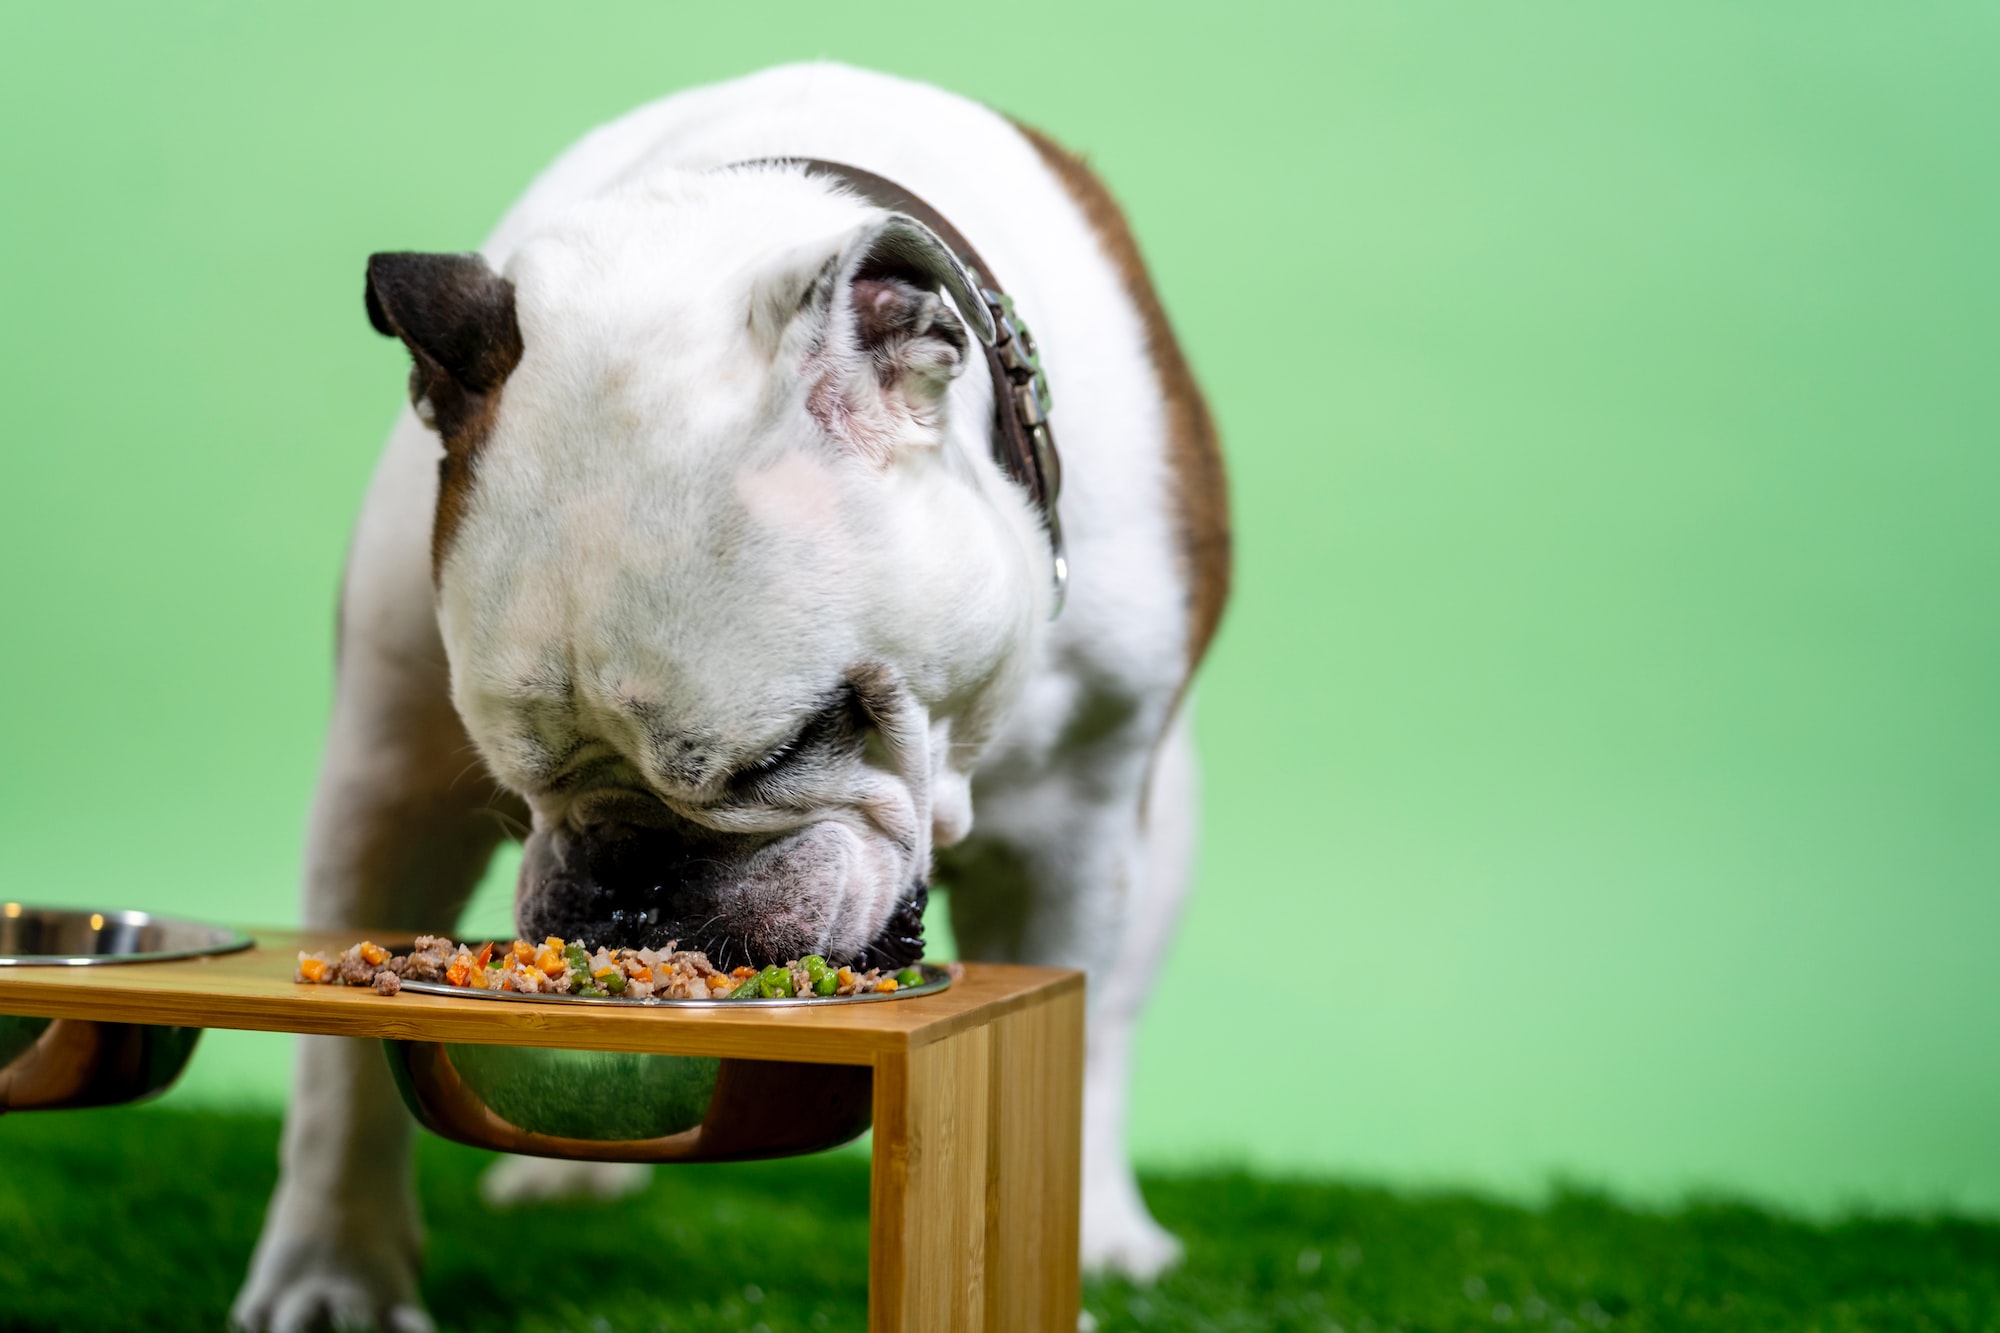 How To Grind Pumpkin Seeds For Dogs